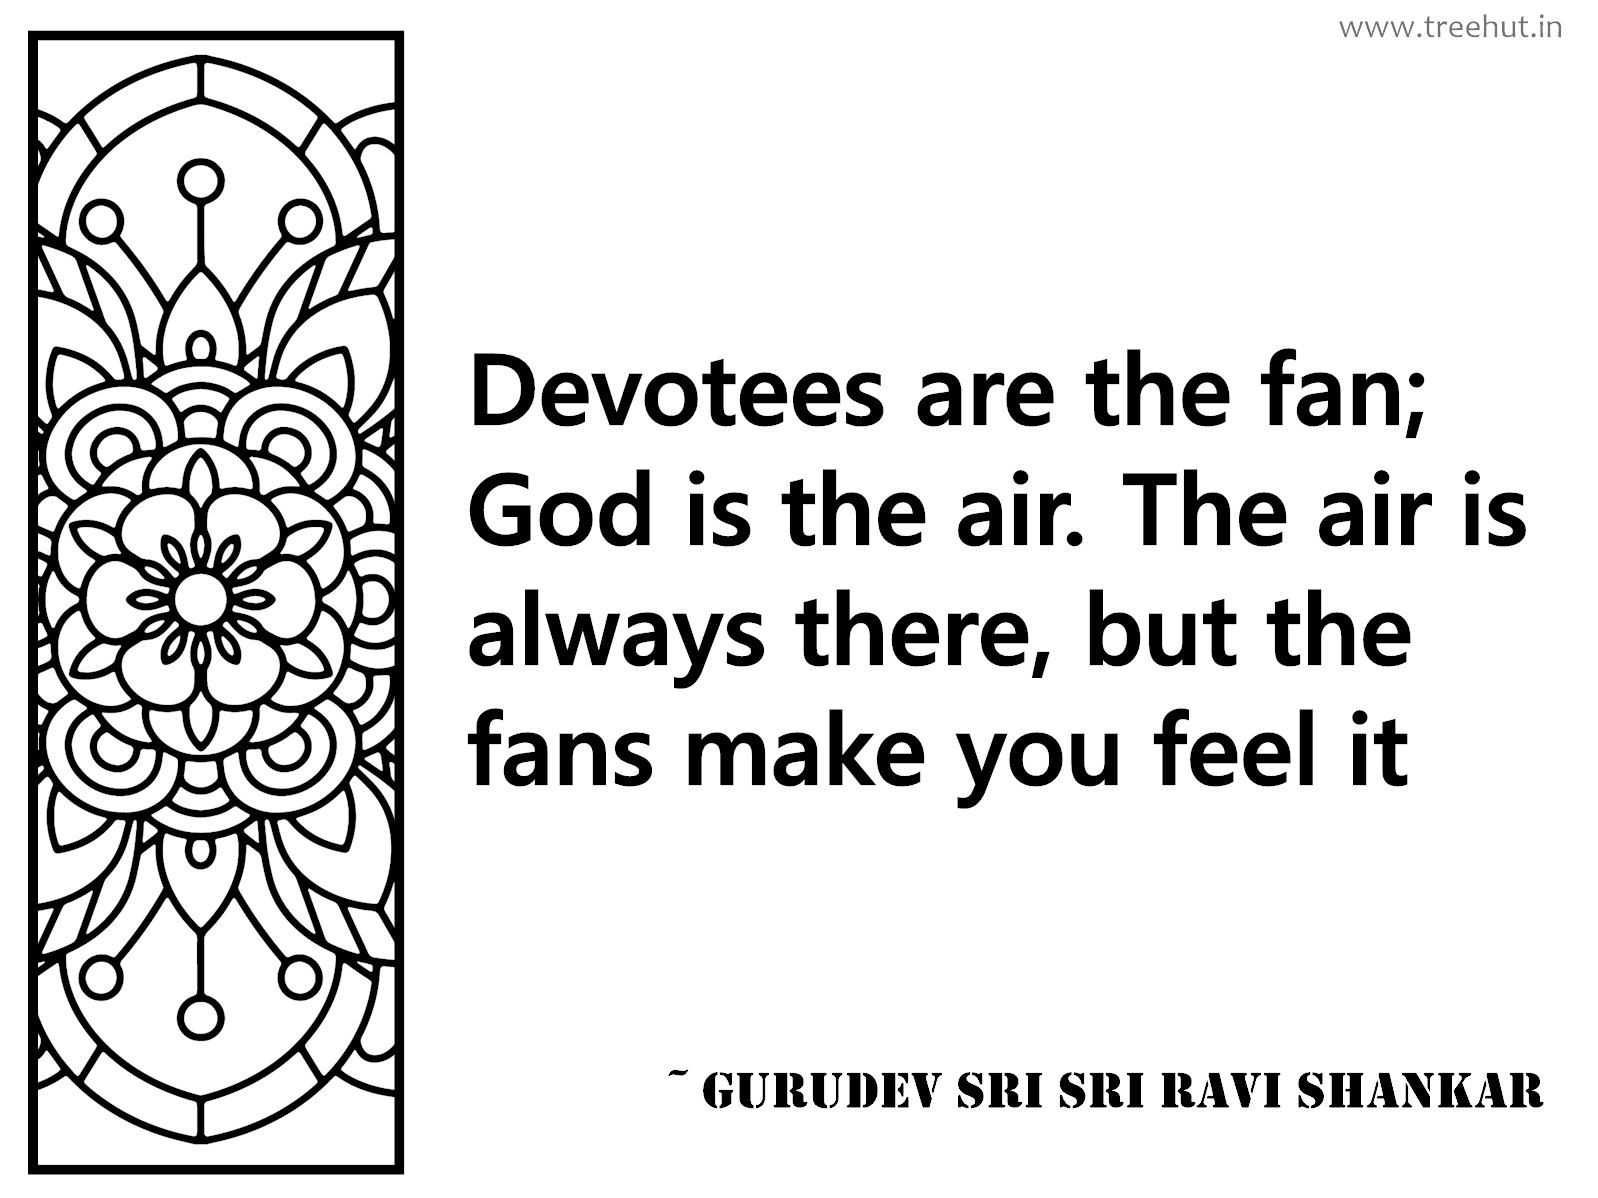 Devotees are the fan; God is the air. The air is always there, but the fans make you feel it Inspirational Quote by Gurudev Sri Sri Ravi Shankar, coloring pages